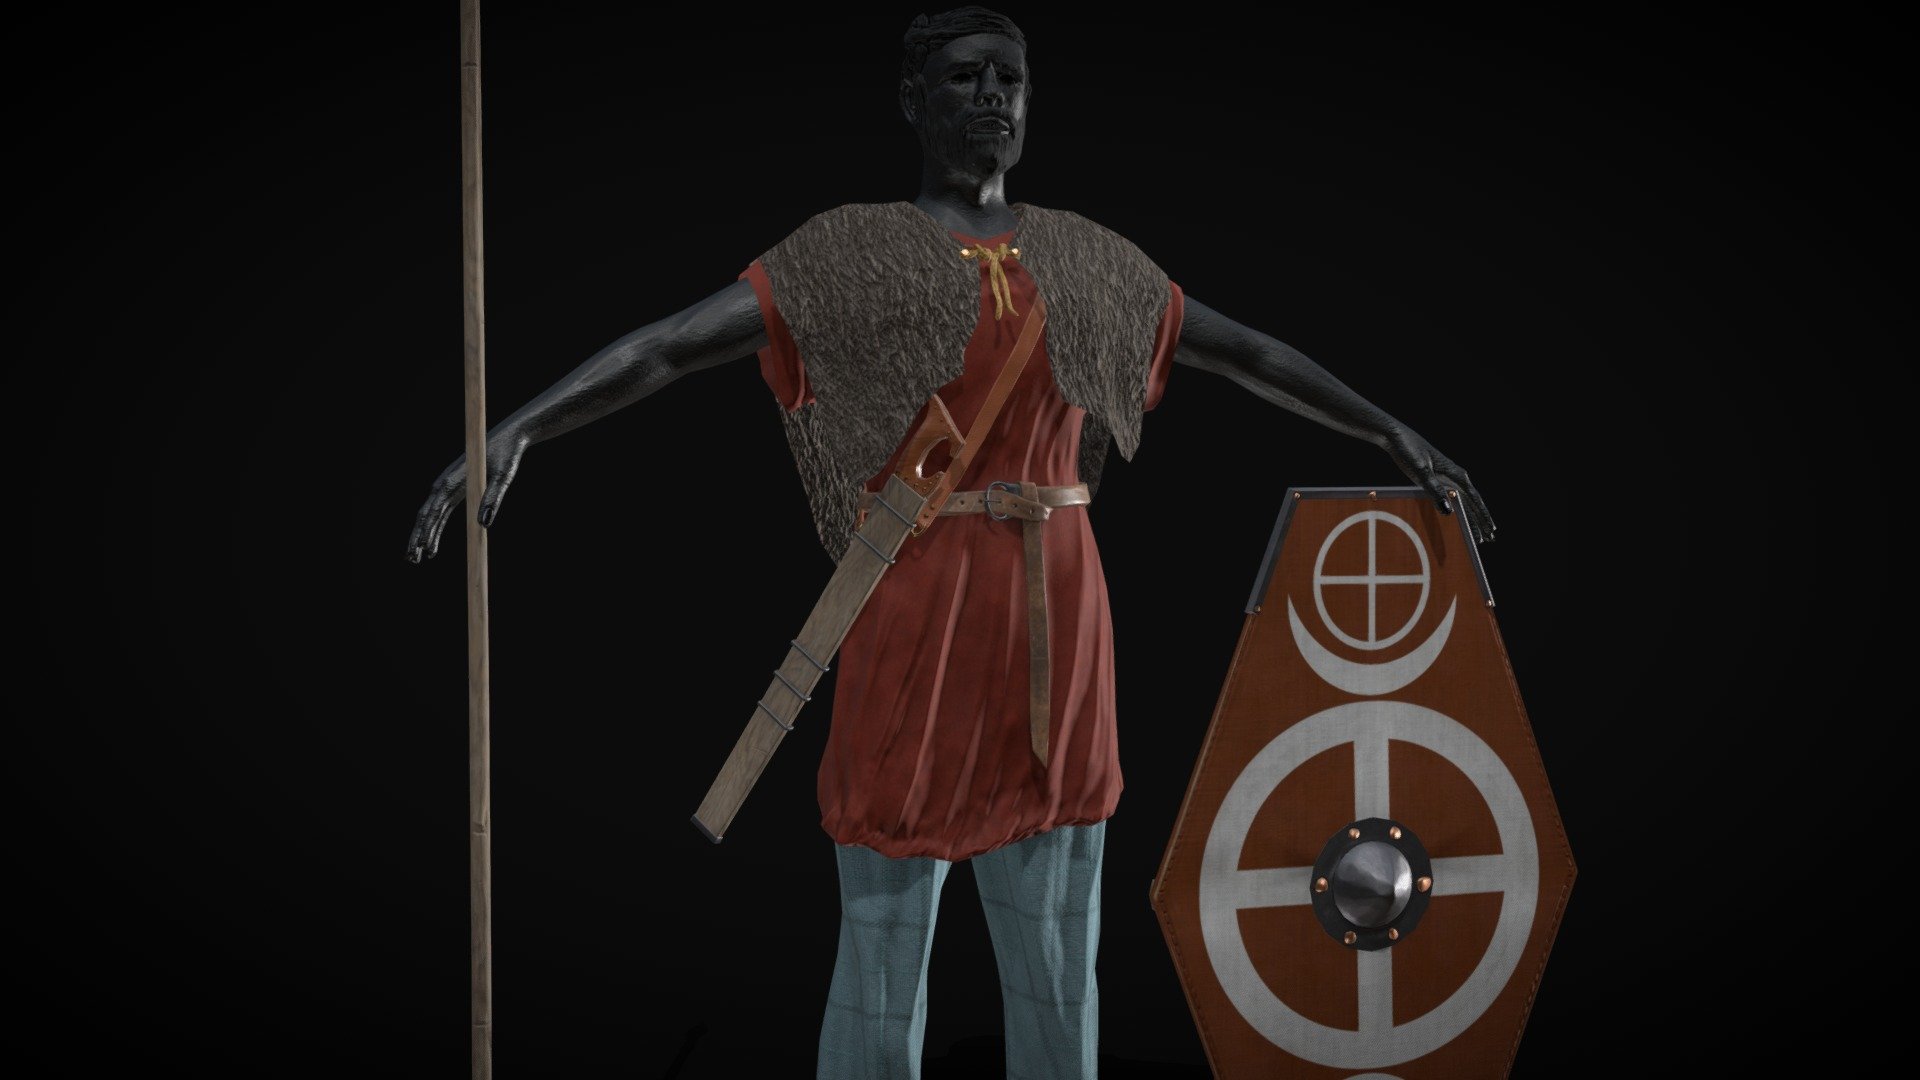 Suebi Auxilia Warrior
This brave Germanic warrior served as auxilia in the army of Gaius Julius Cesar.
Character is intended to be used in historically accurate scenes or any other game environment.




Prefab:



SM_belt – Polygon: 438

SM_body – Polygon: 8202

SM_cape – Polygon: 744

SM_pants – Polygon: 965

SM_scabard – Polygon: 396

SM_shield – Polygon: 362

SM_shoes – Polygon: 806

SM_spear – Polygon: 94

SM_sword – Polygon: 190

SM_tunica – Polygon: 668


Technical details



UV mapping and geometry: Polygonal Quads.

Texture set dimensions and number: 2048x2048; (4) set (6 channels).

Types of materials and texture maps: PBR metallic – roughness.


Source:
T. Tacitus, &ldquo;Germania,